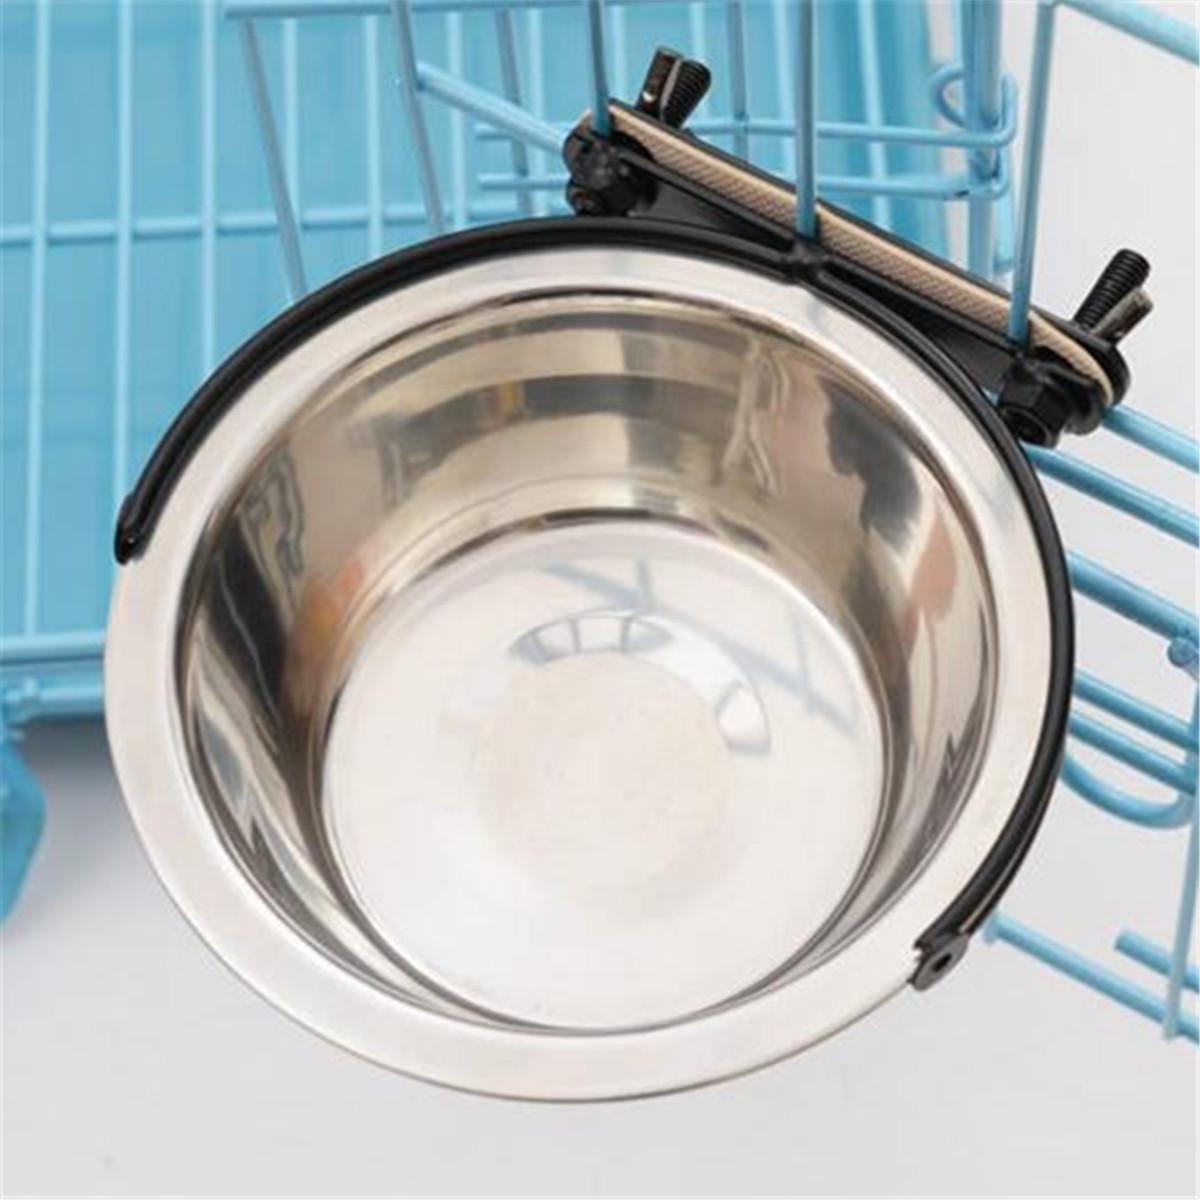 Stainless-Steel-Pet-Dog-Puppy-Hanging-Food-Water-Bowl-Feeder-For-Crate-Cage-Coop-Decorations-1182035